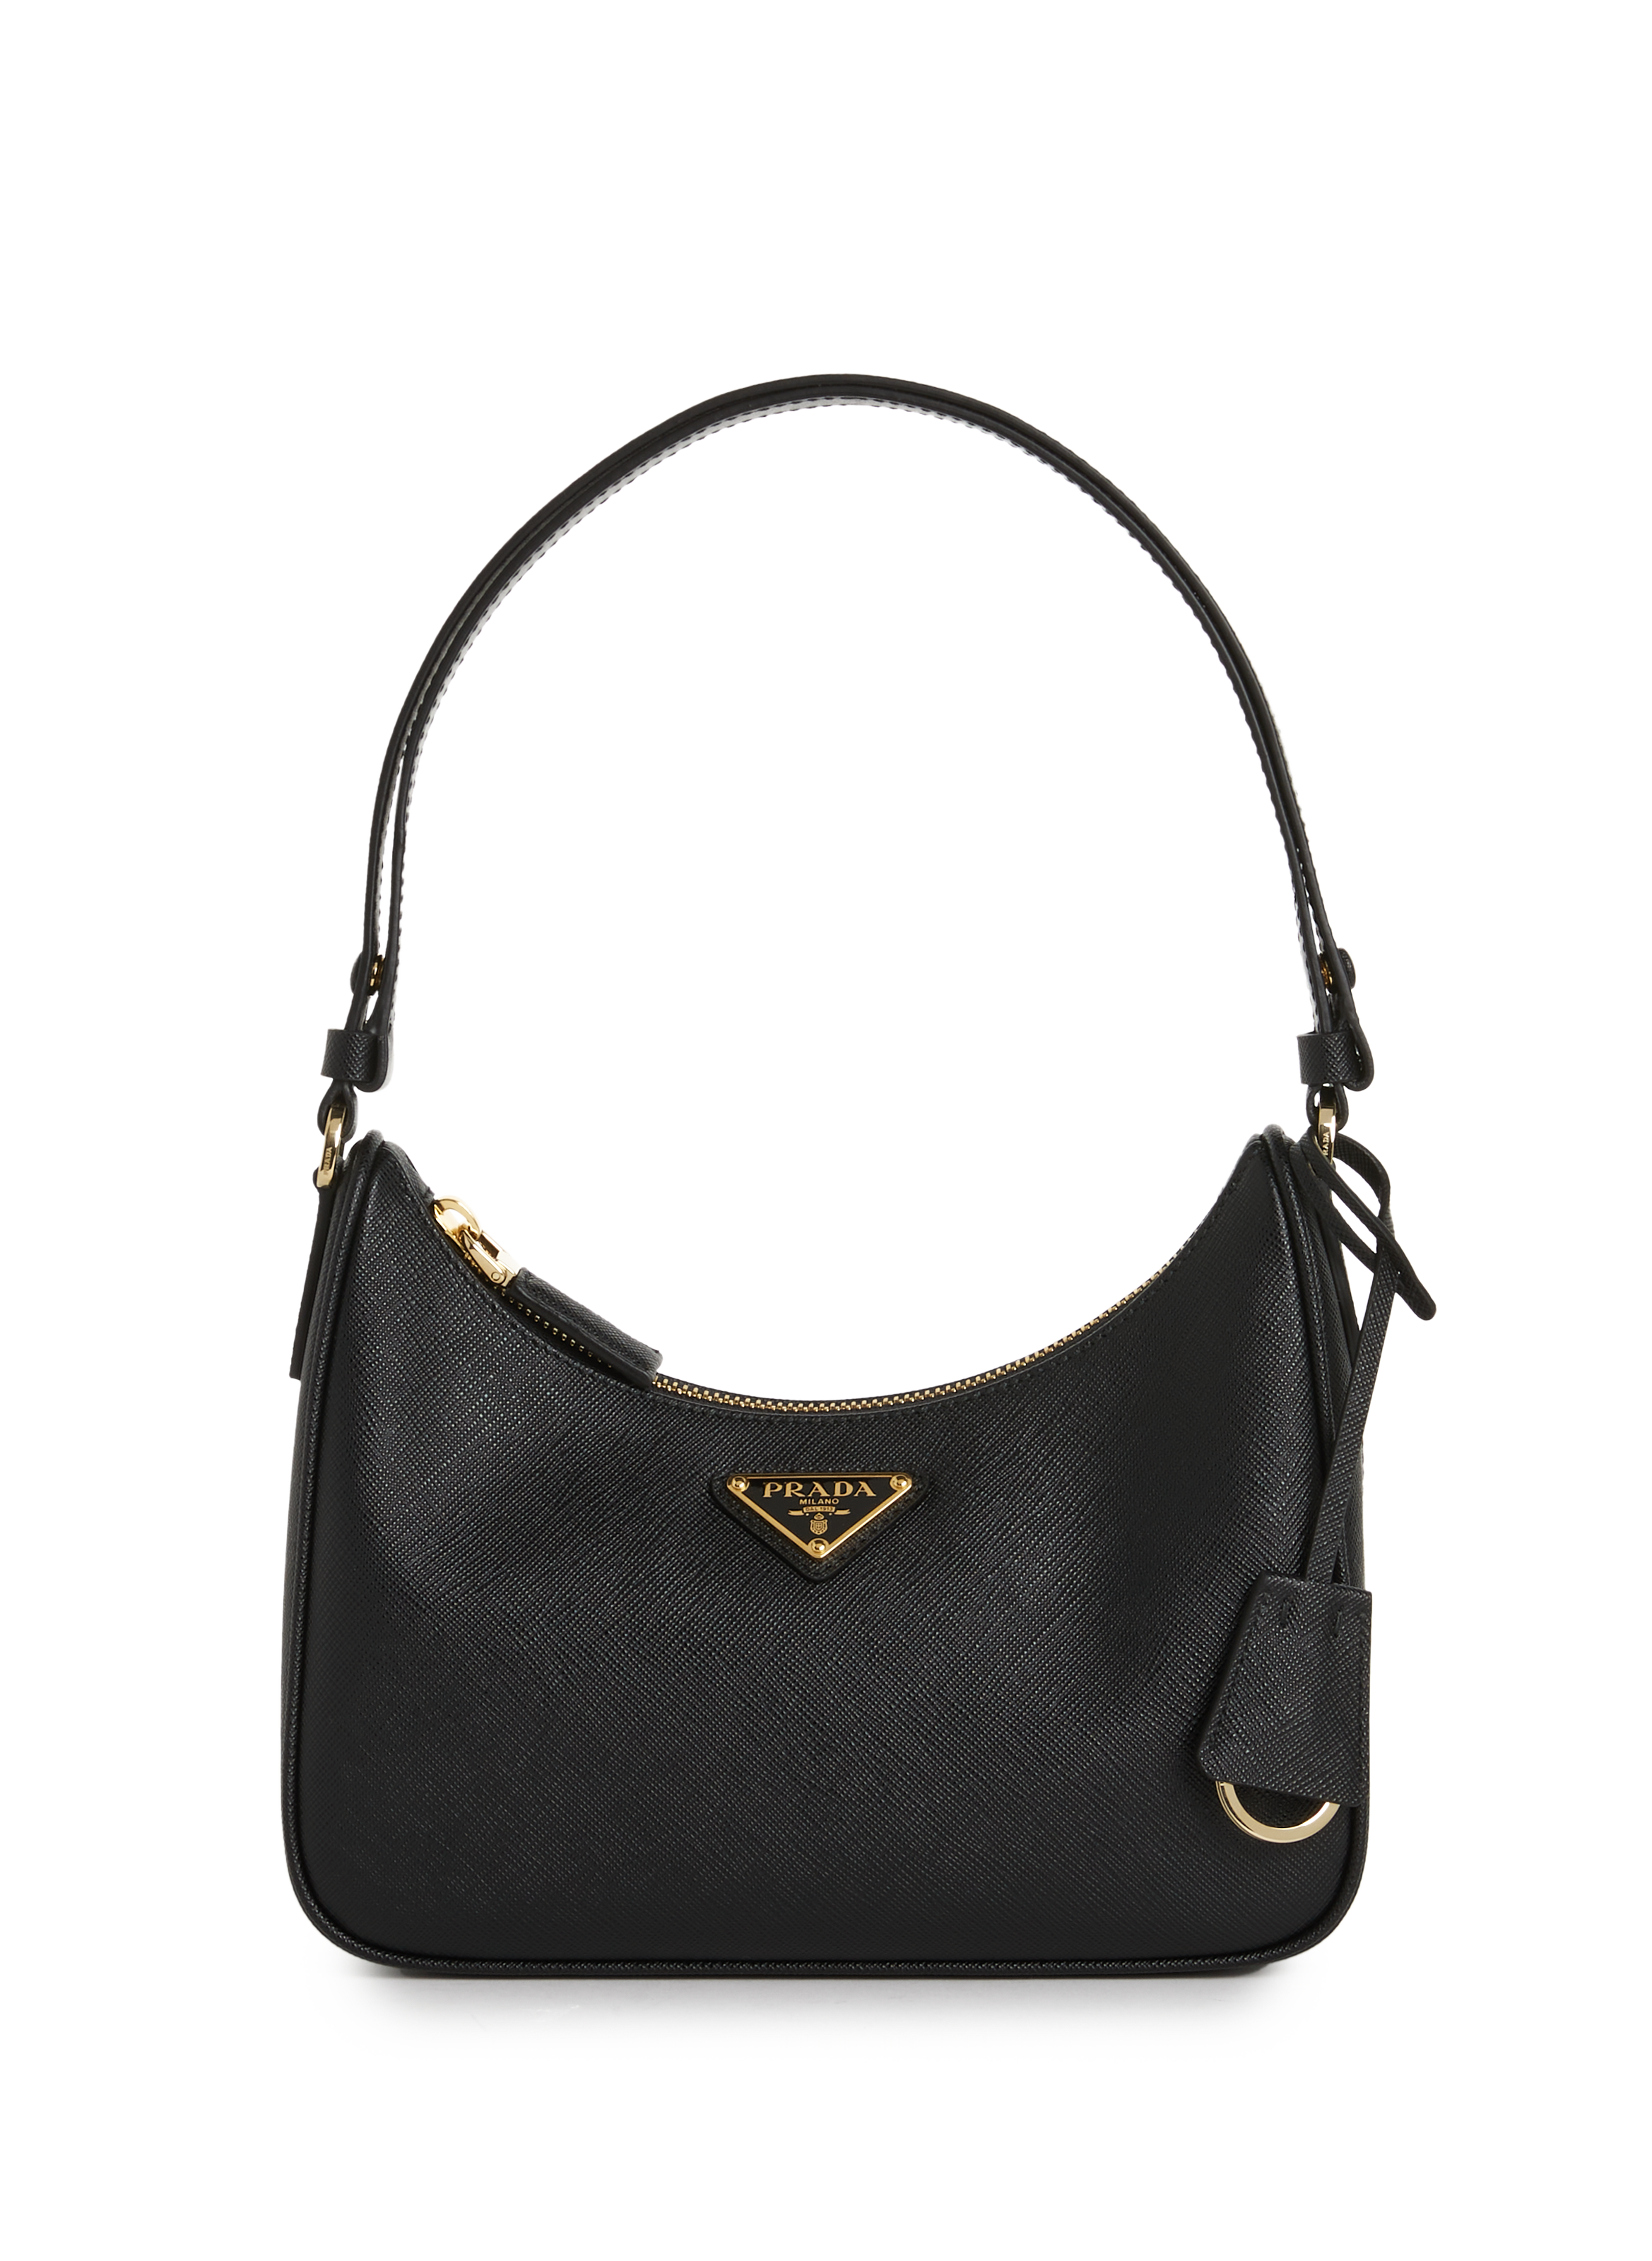 PRADA RE-EDITION BAG IN NYLON WITH CRYSTALS CROSSBODY BAG WITH A POUCH |  eBay